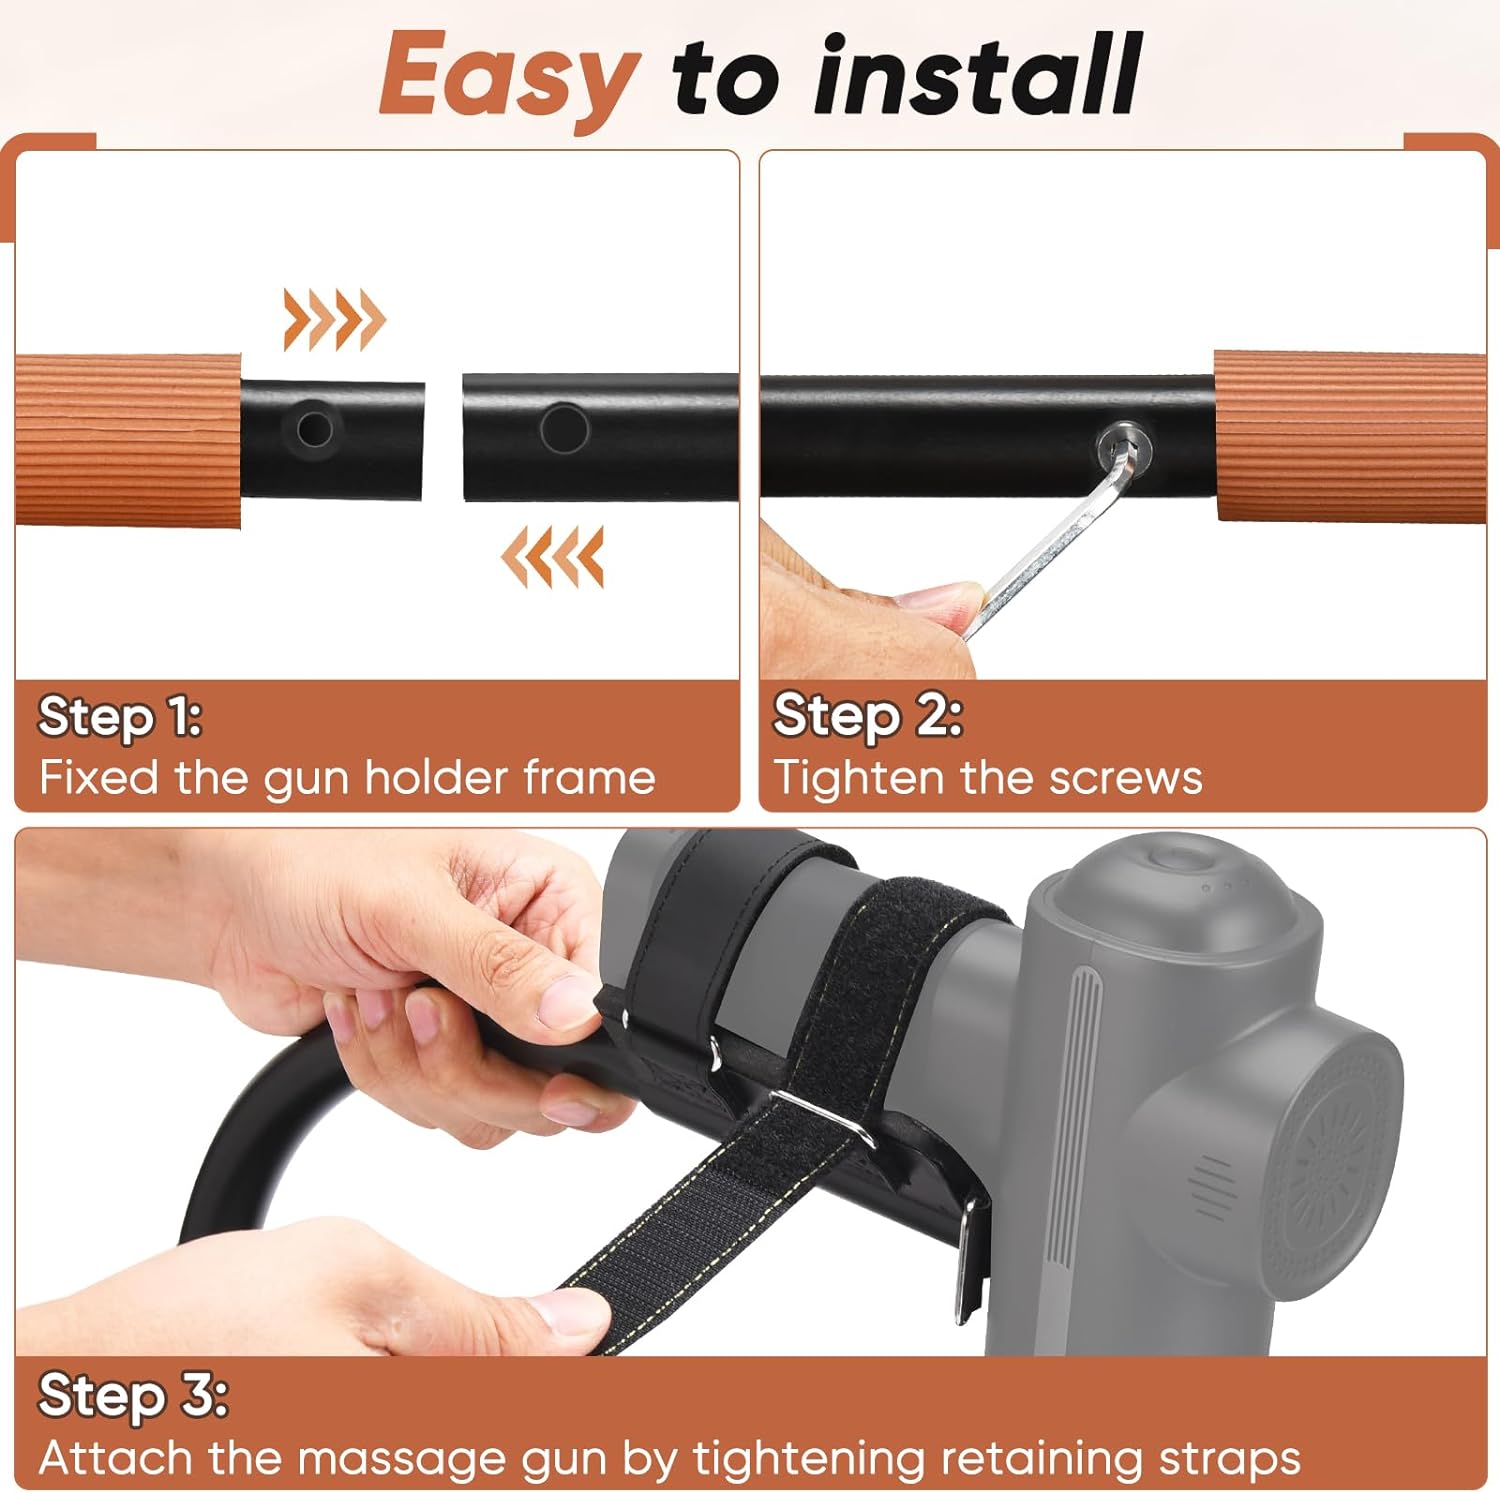 Massage Gun Holder, Upgrade Fixed Design, No Rotation, Easy Set up for Self-Massage of Hard-to-Reach Places, Compatible with Most Massage Guns, Massage Gun Not Included - Black